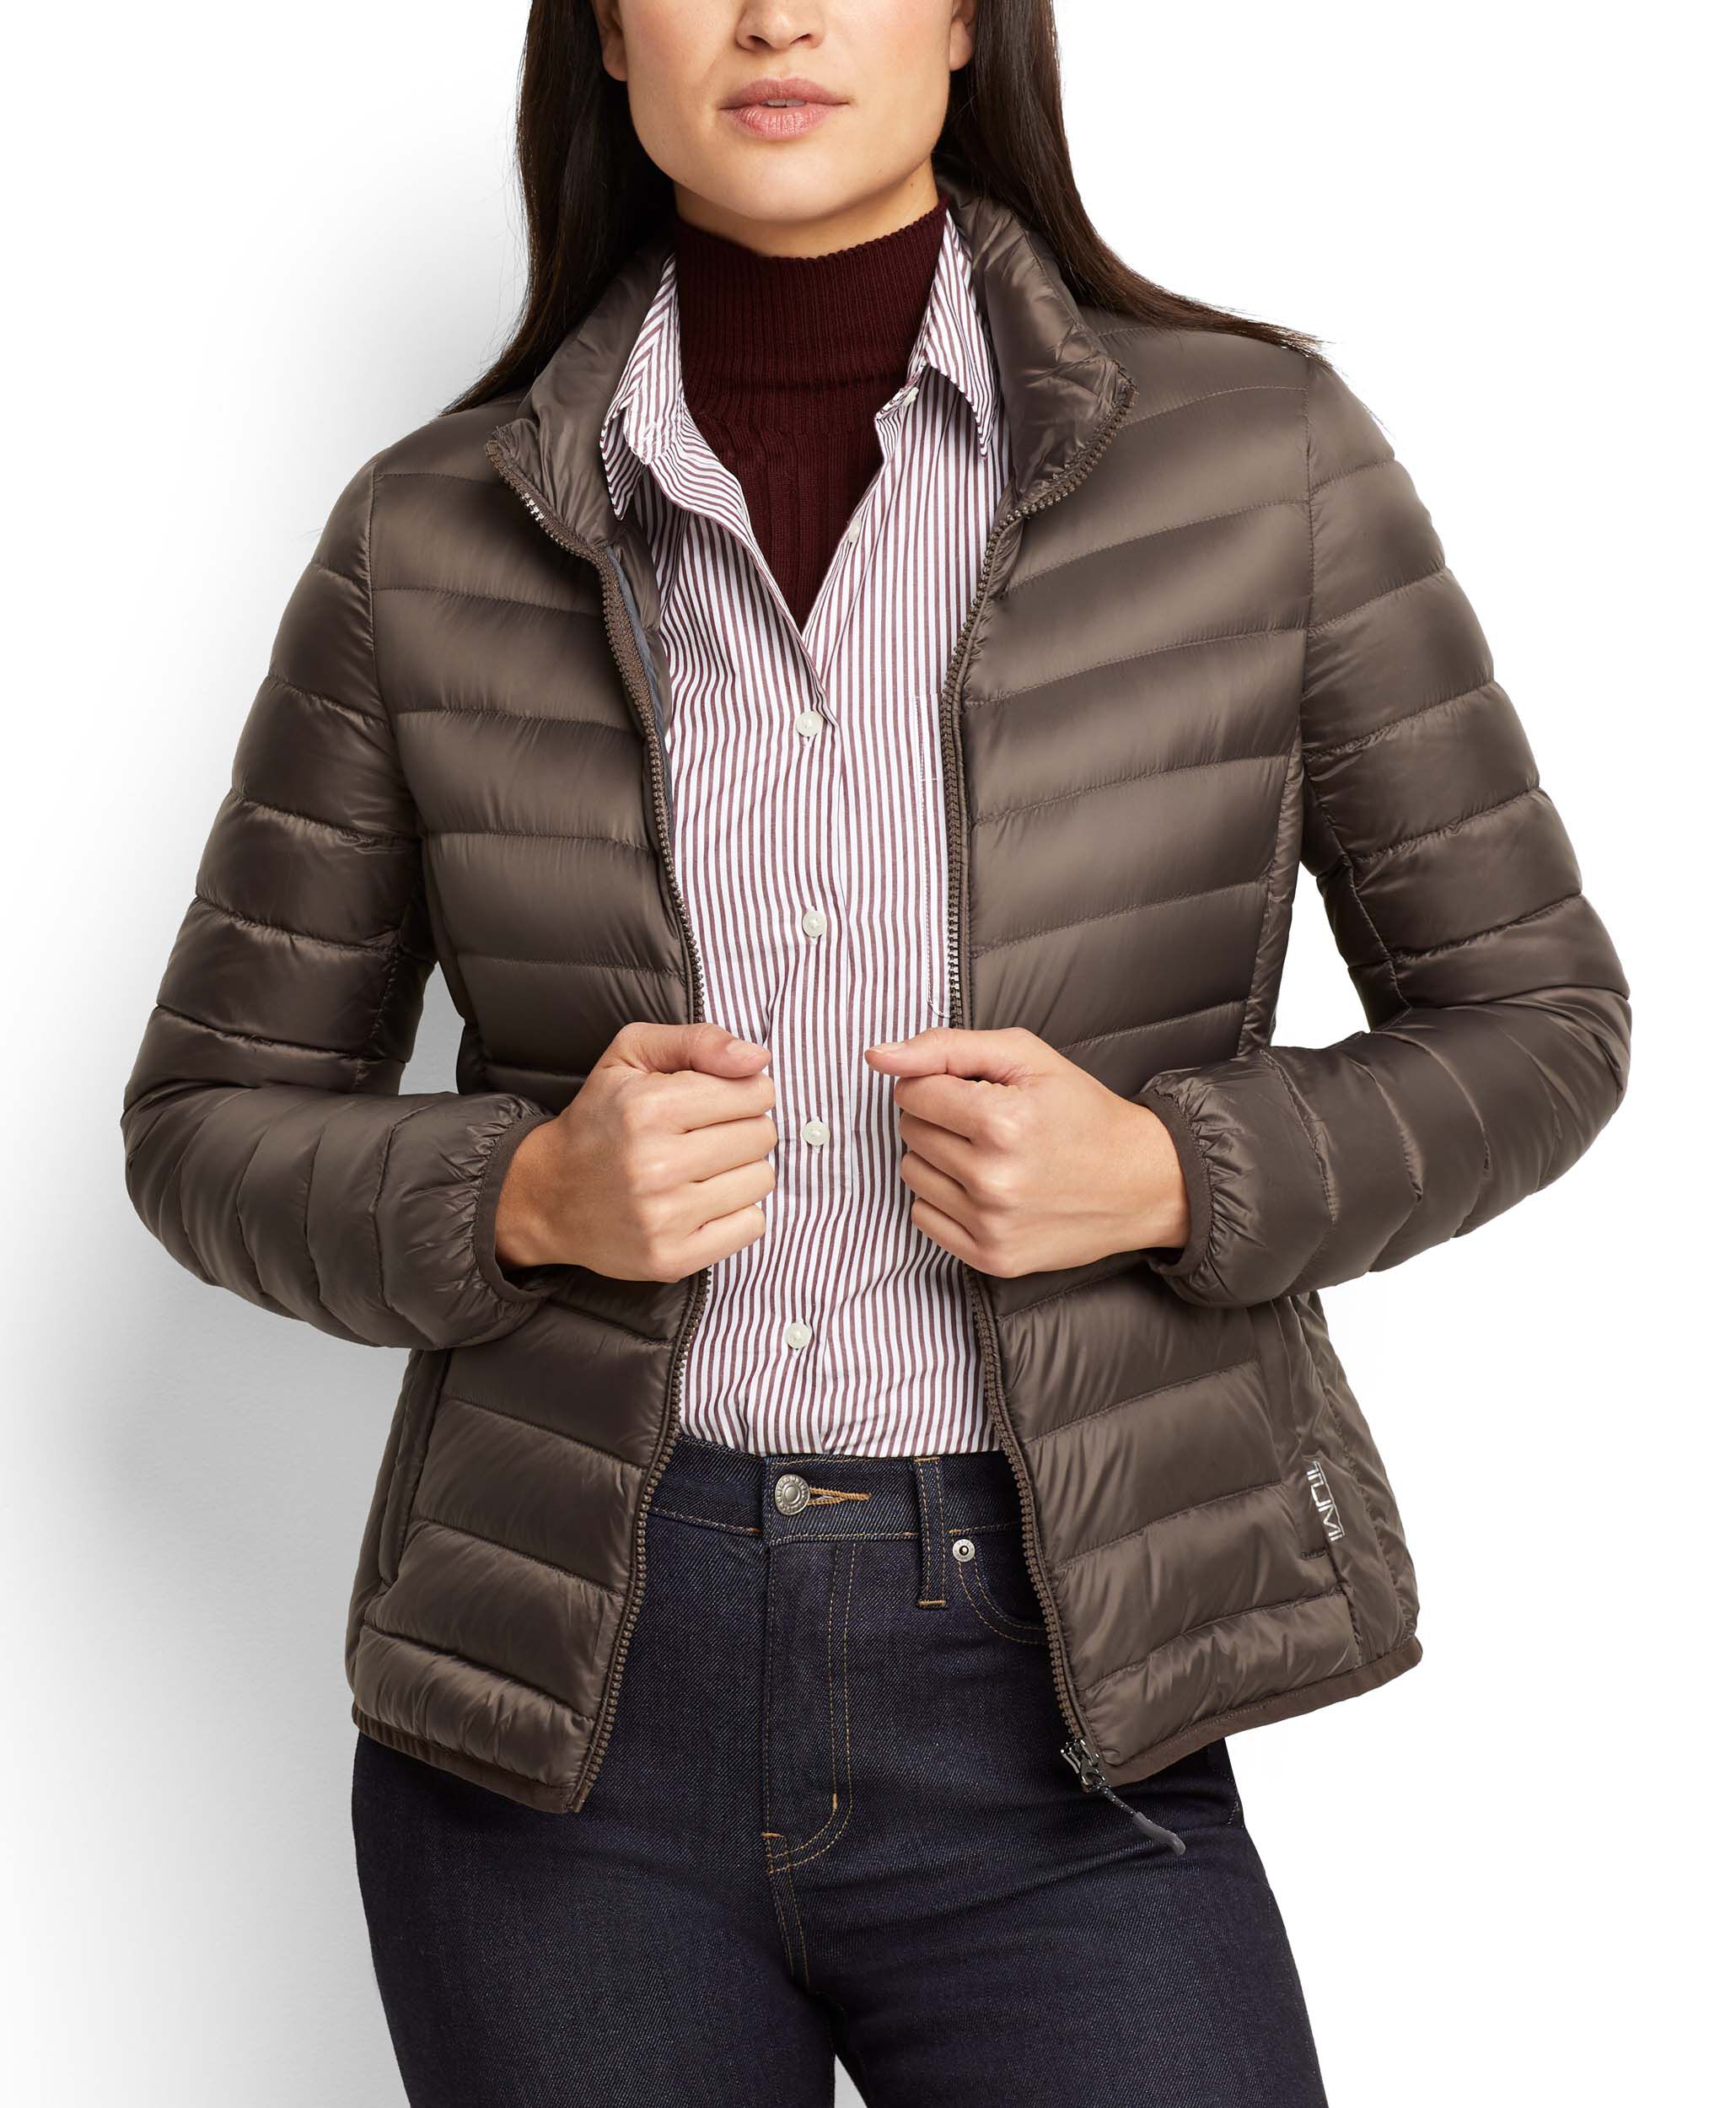 Clairmont Packable Travel Puffer Jacket 